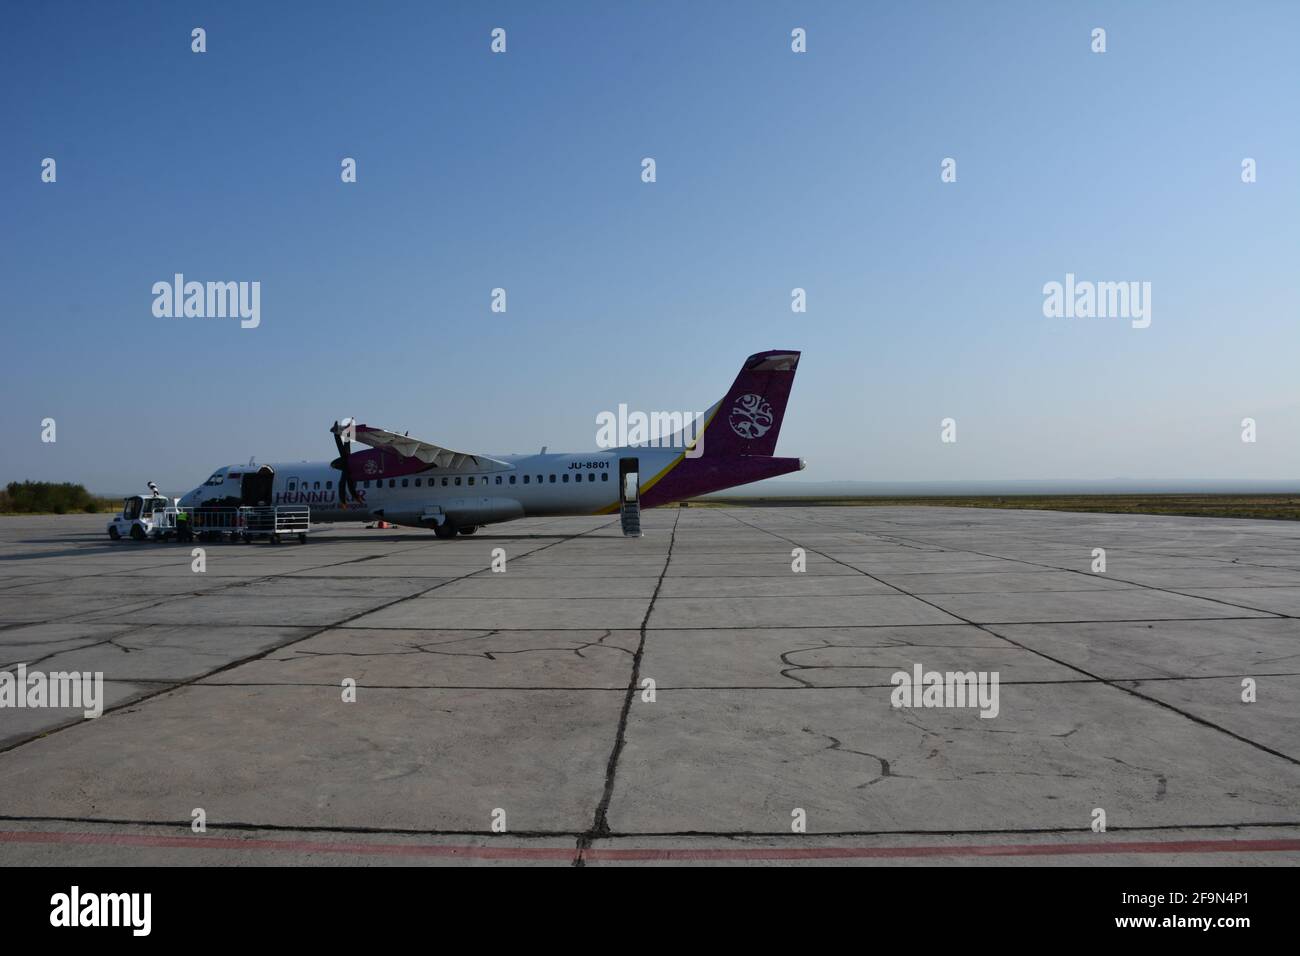 A Hunnu Air flight after landing in the early morning at Dalanzadgad, Ömnögovi Province, Mongolia. The airport is the gateway to the Gobi Desert. Stock Photo